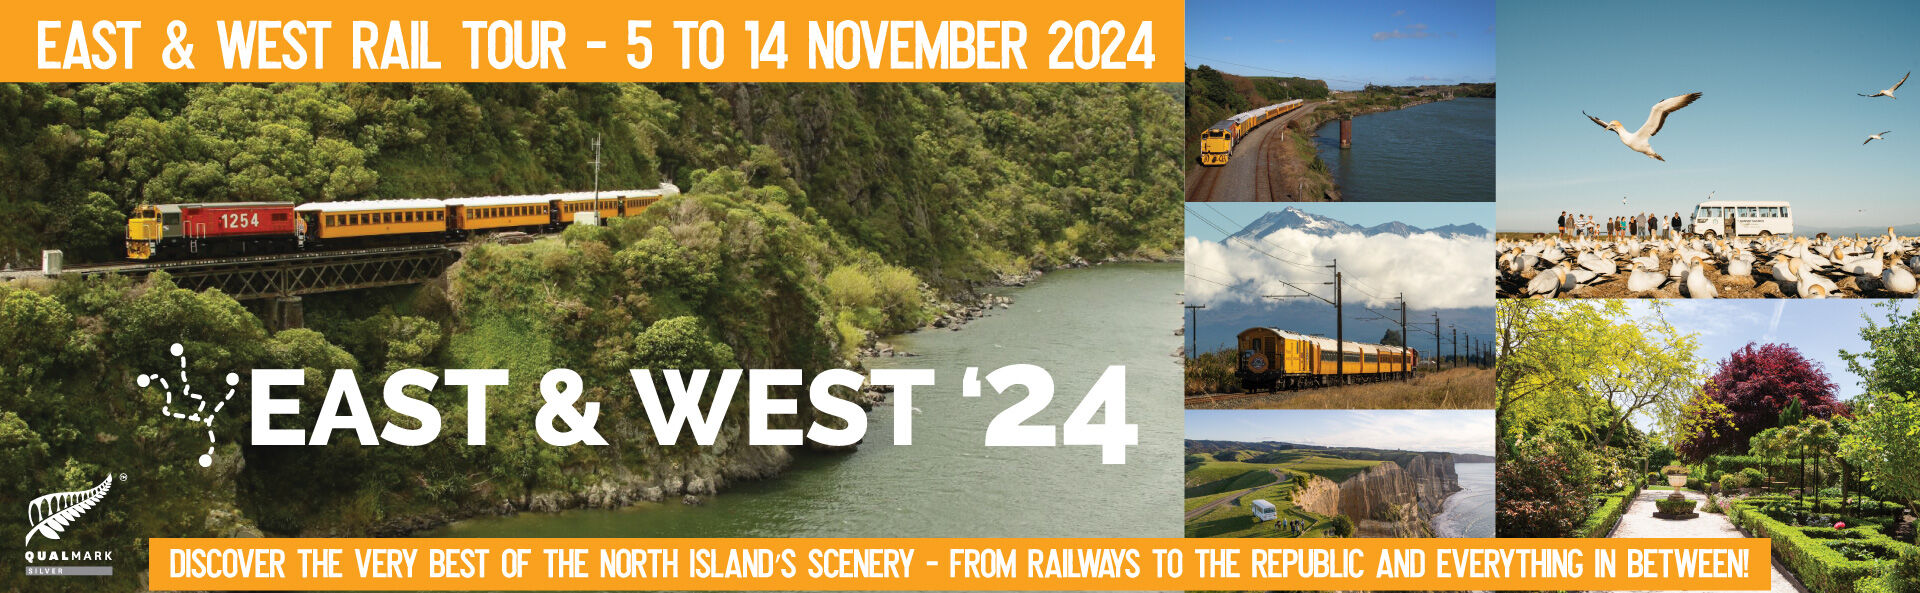 Join the Glenbrook Vintage Railway as we experience some of the best of the North Island's scenic railways!